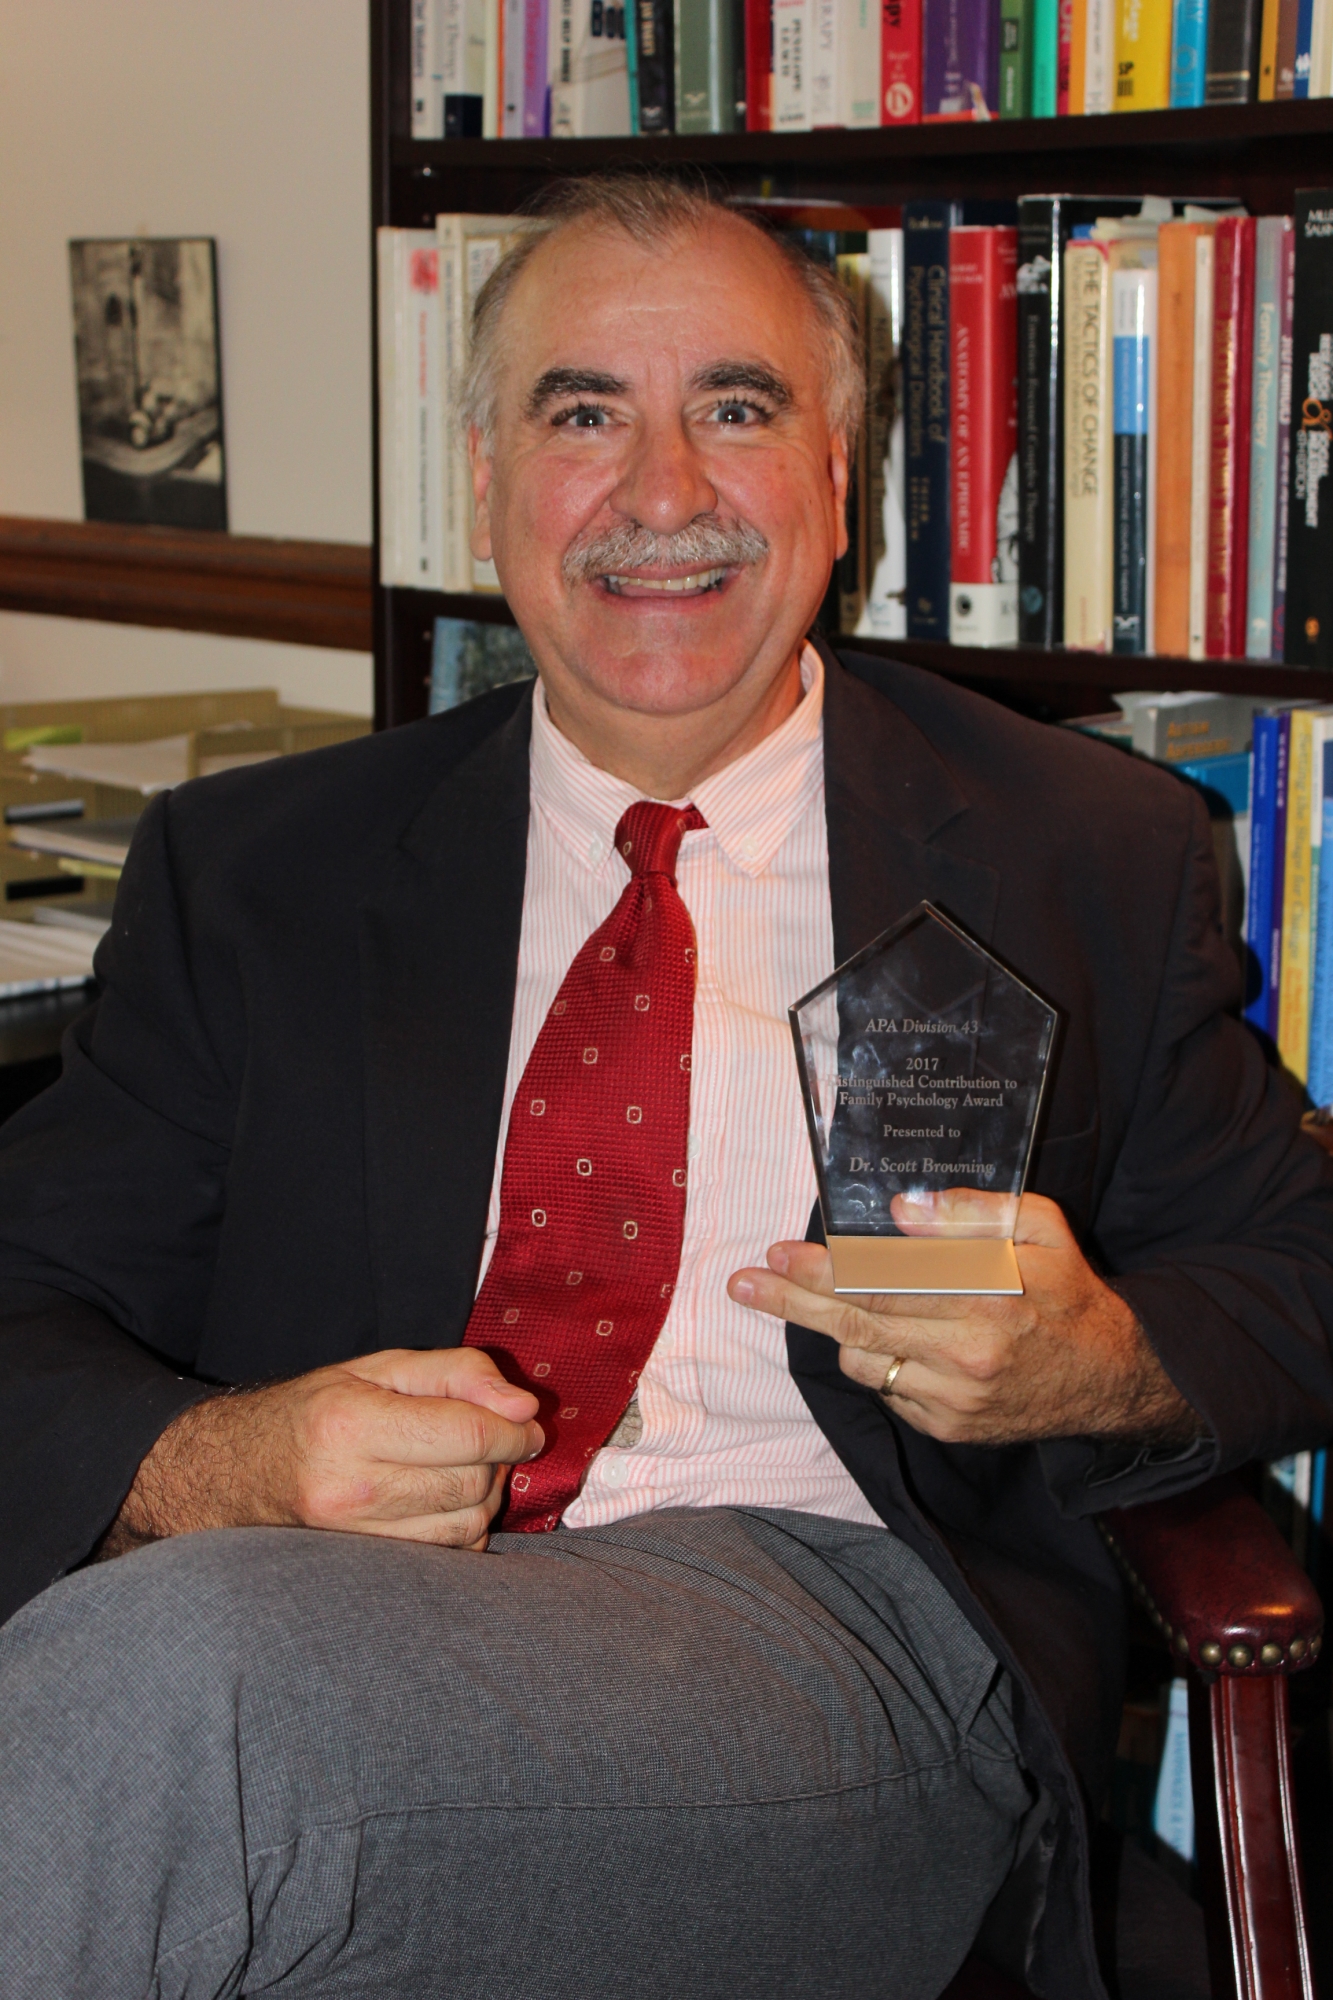 Dr. Browning poses with his award.